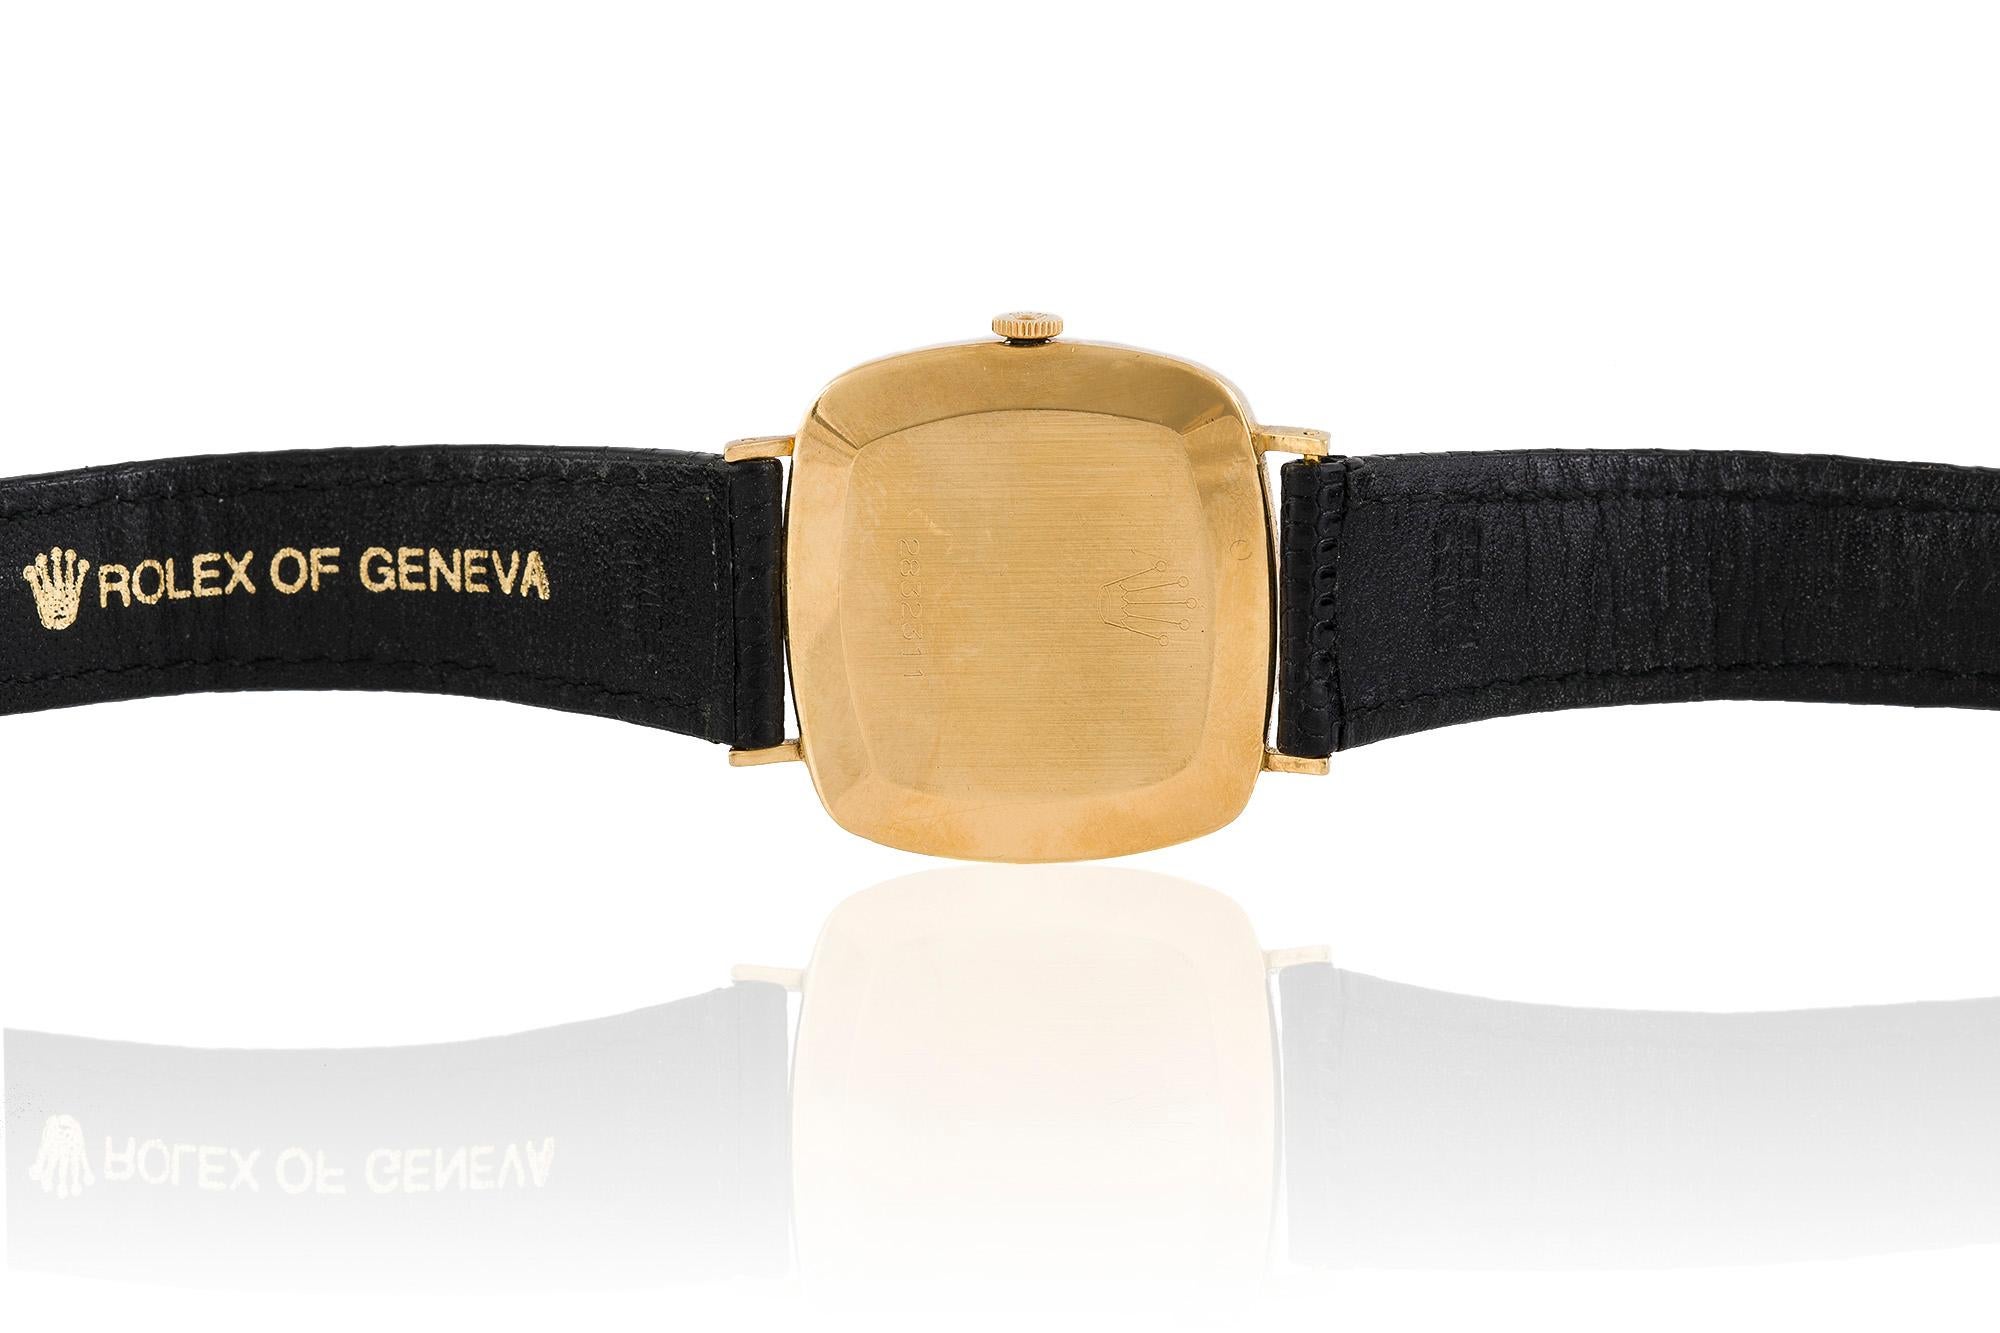 The Rolex cellini watch is finely crafted in 18k gold with black leather.
no # 2832311.
Circa 1975.
